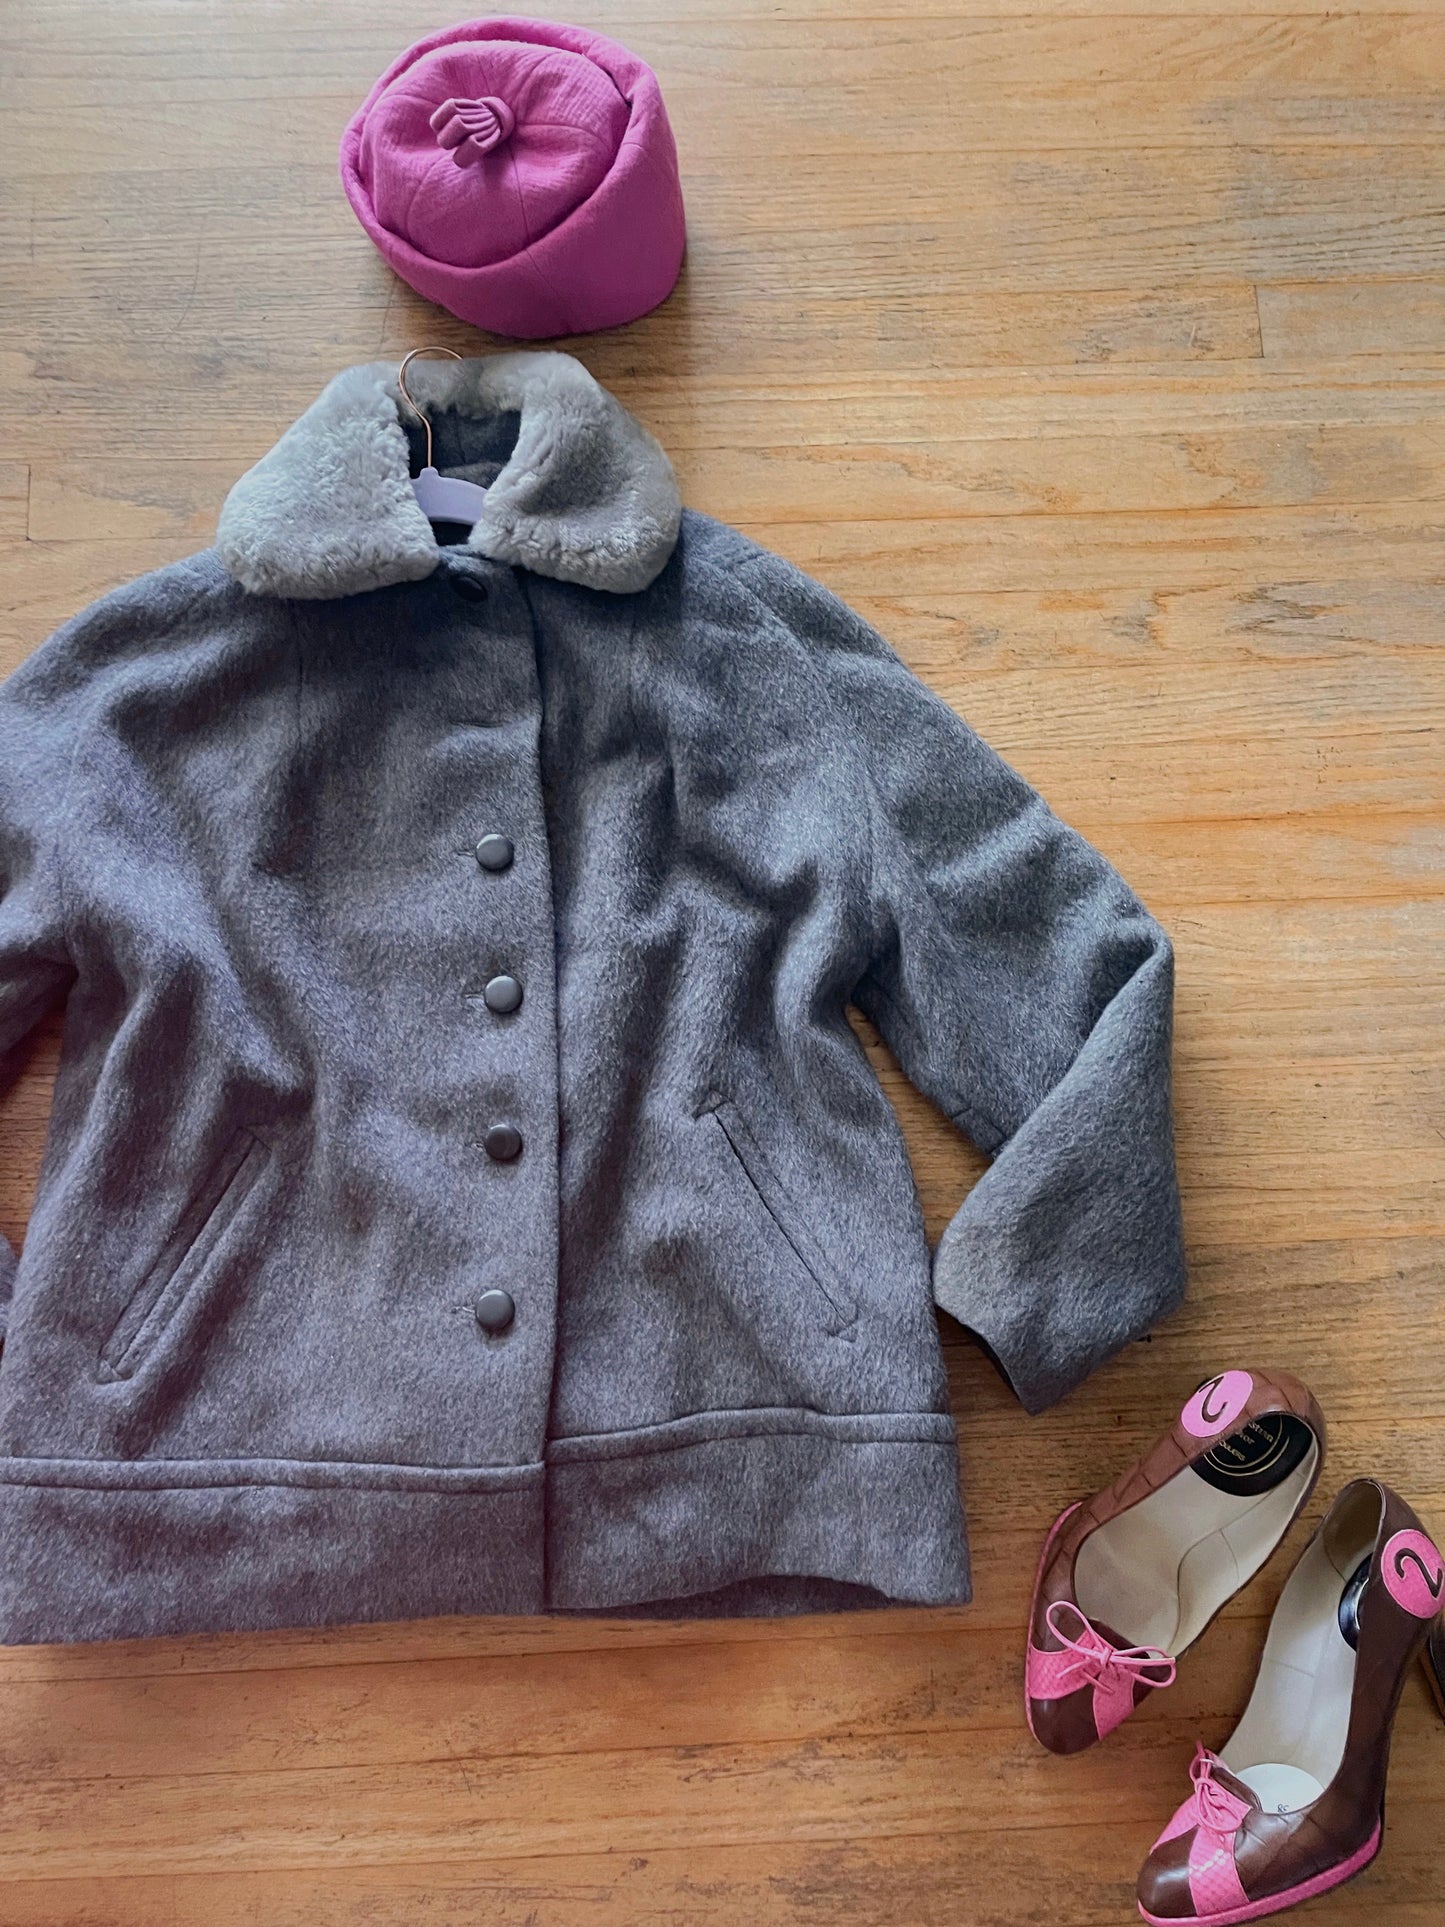 Vintage 50s 60s Charcoal Grey Coat Jacket with Fuzzy Plush Collar Best Fits Sizes S-L